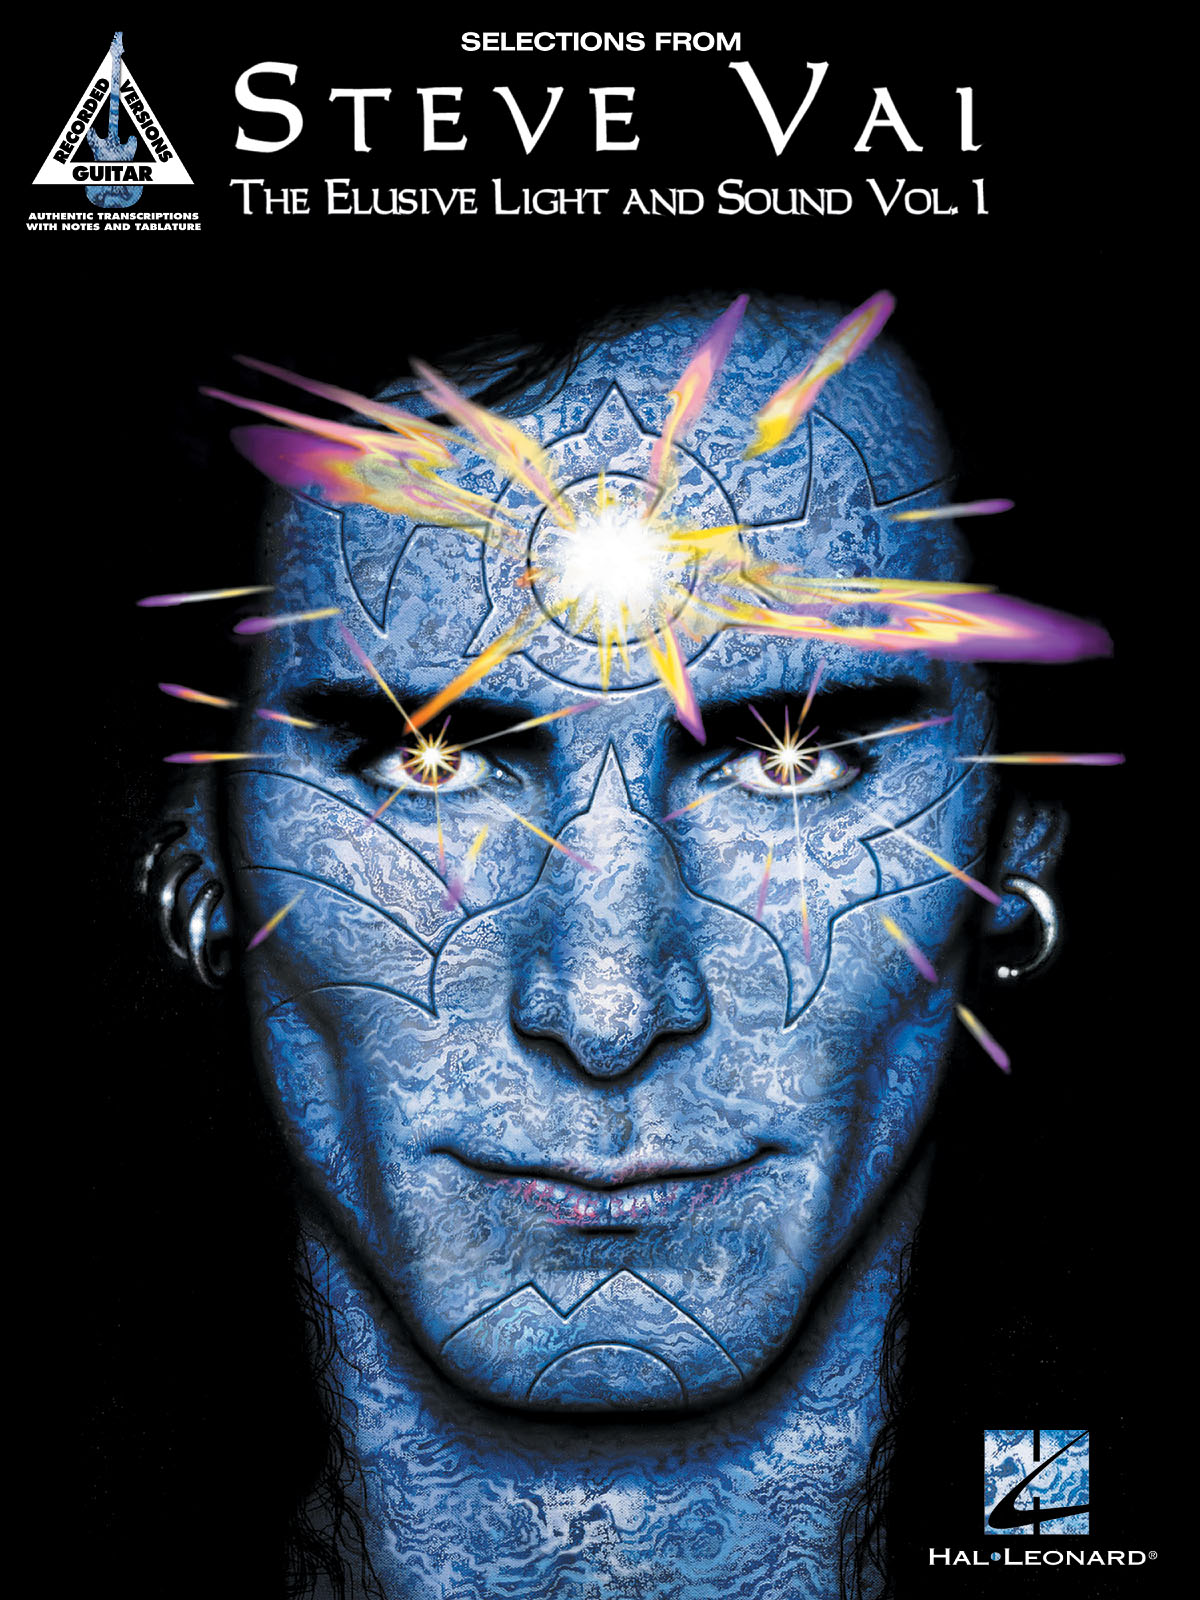 Steve Vai - Selections from The Elusive Light and Sound - Volume 1 - noty na kytaru